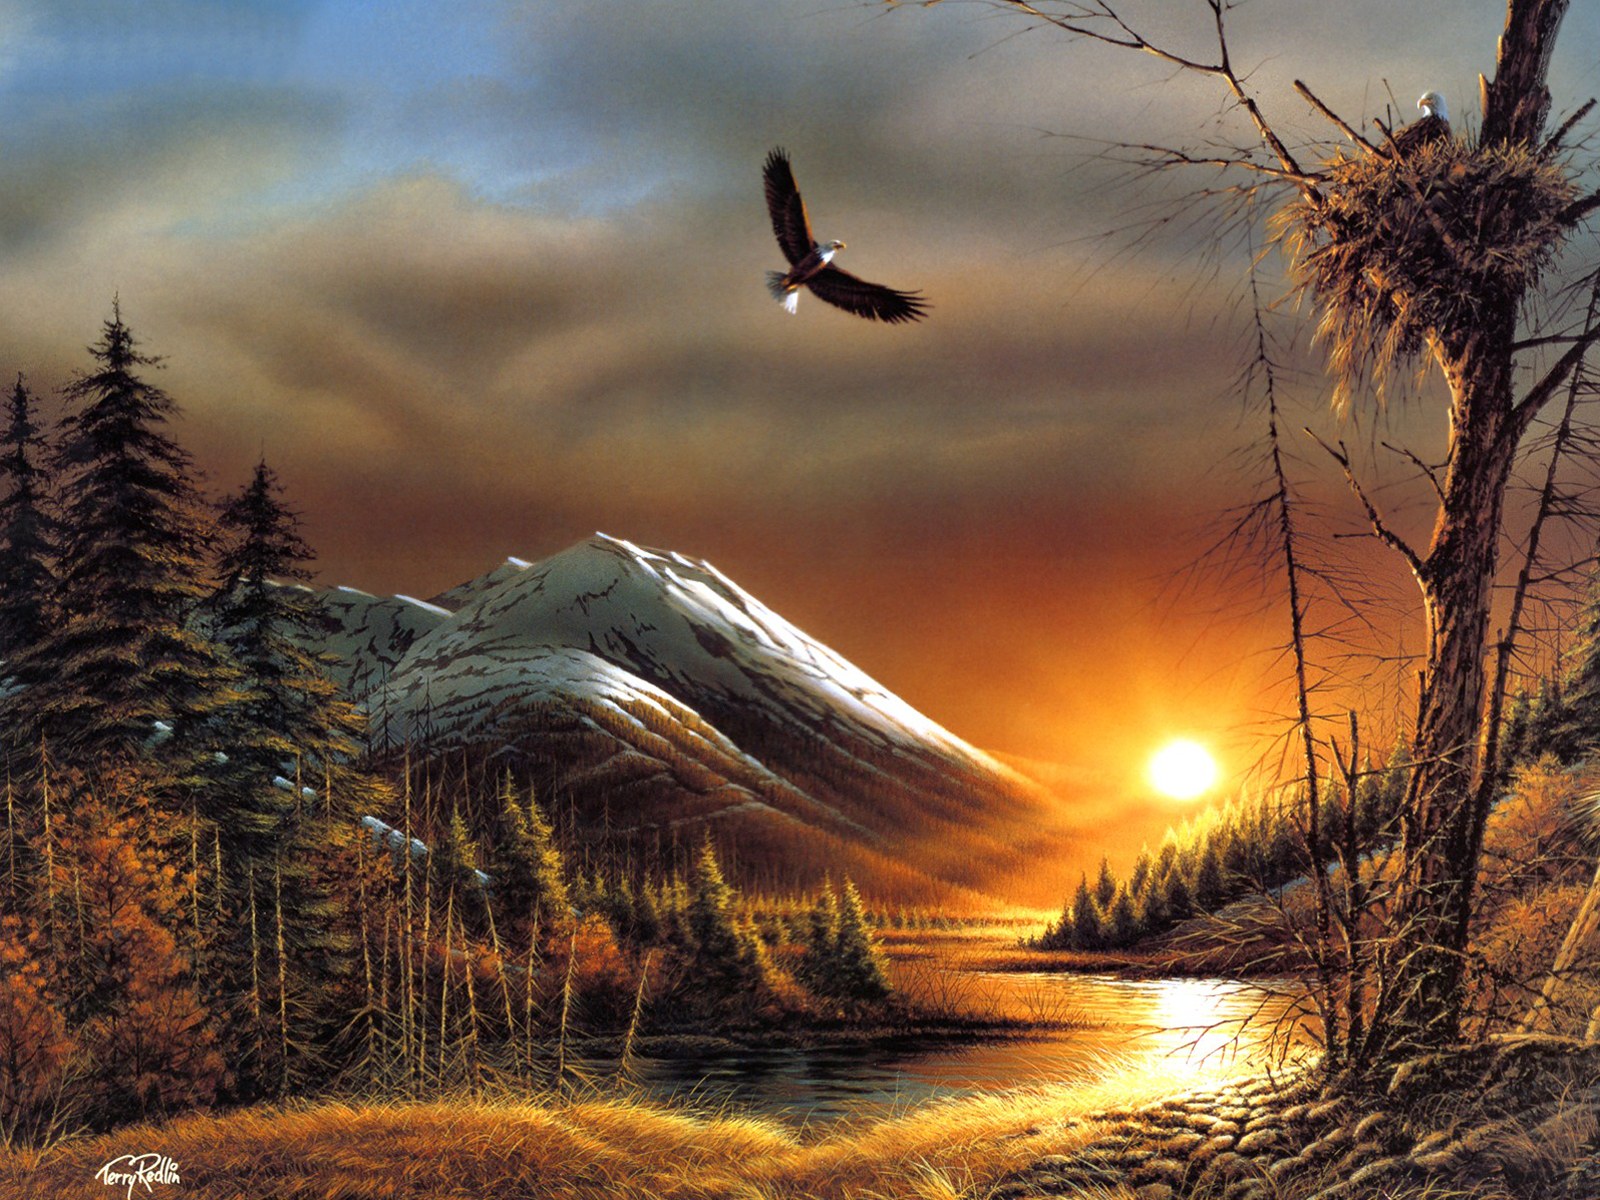  Terry Redlin Outdoor Themes Art Painting s 16001200 NO4 Wallpaper